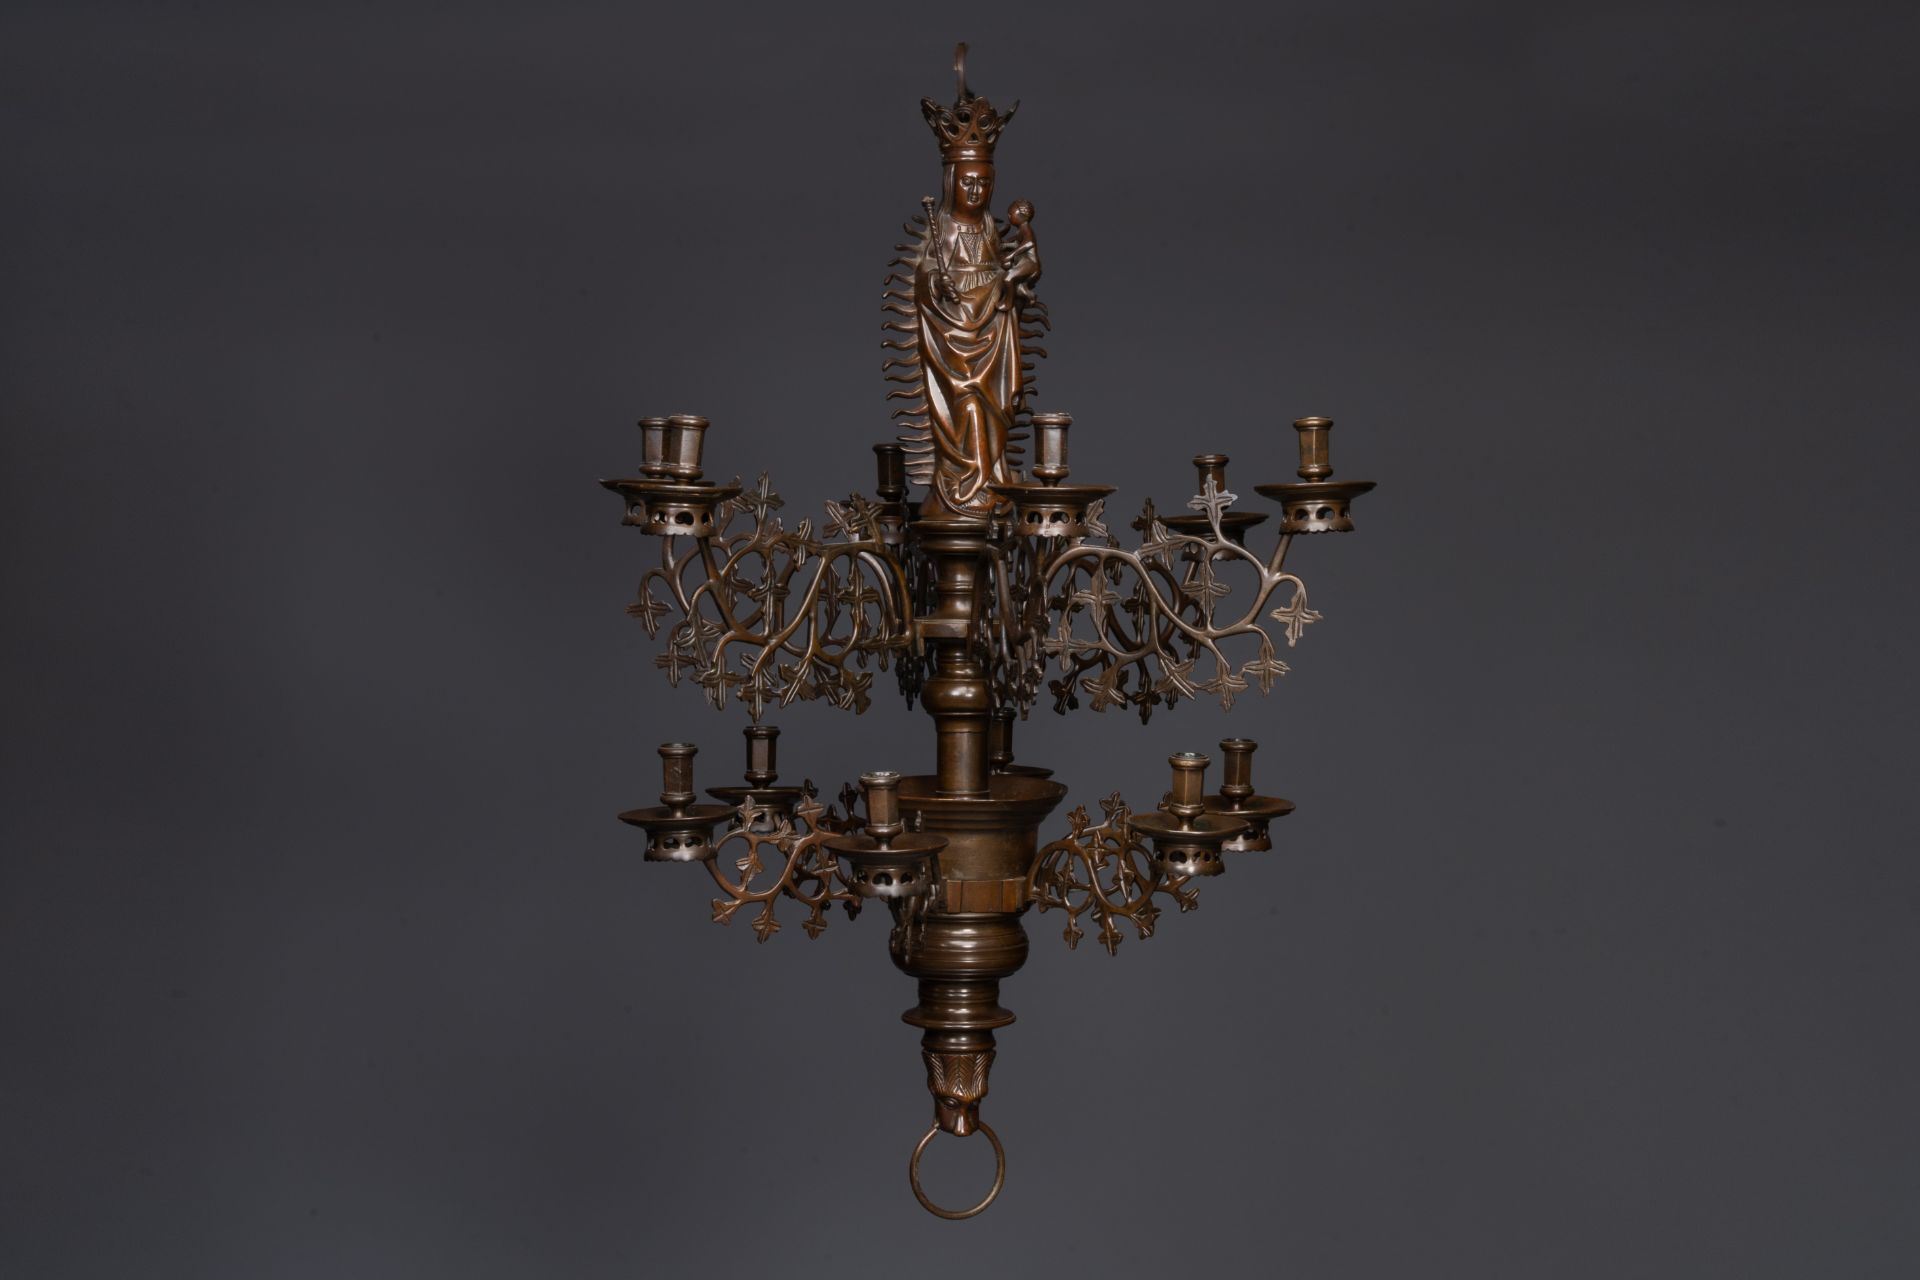 A Flemish or Dutch bronze Gothic Revival large bronze 'Madonna and Child' chandelier, 19th C.